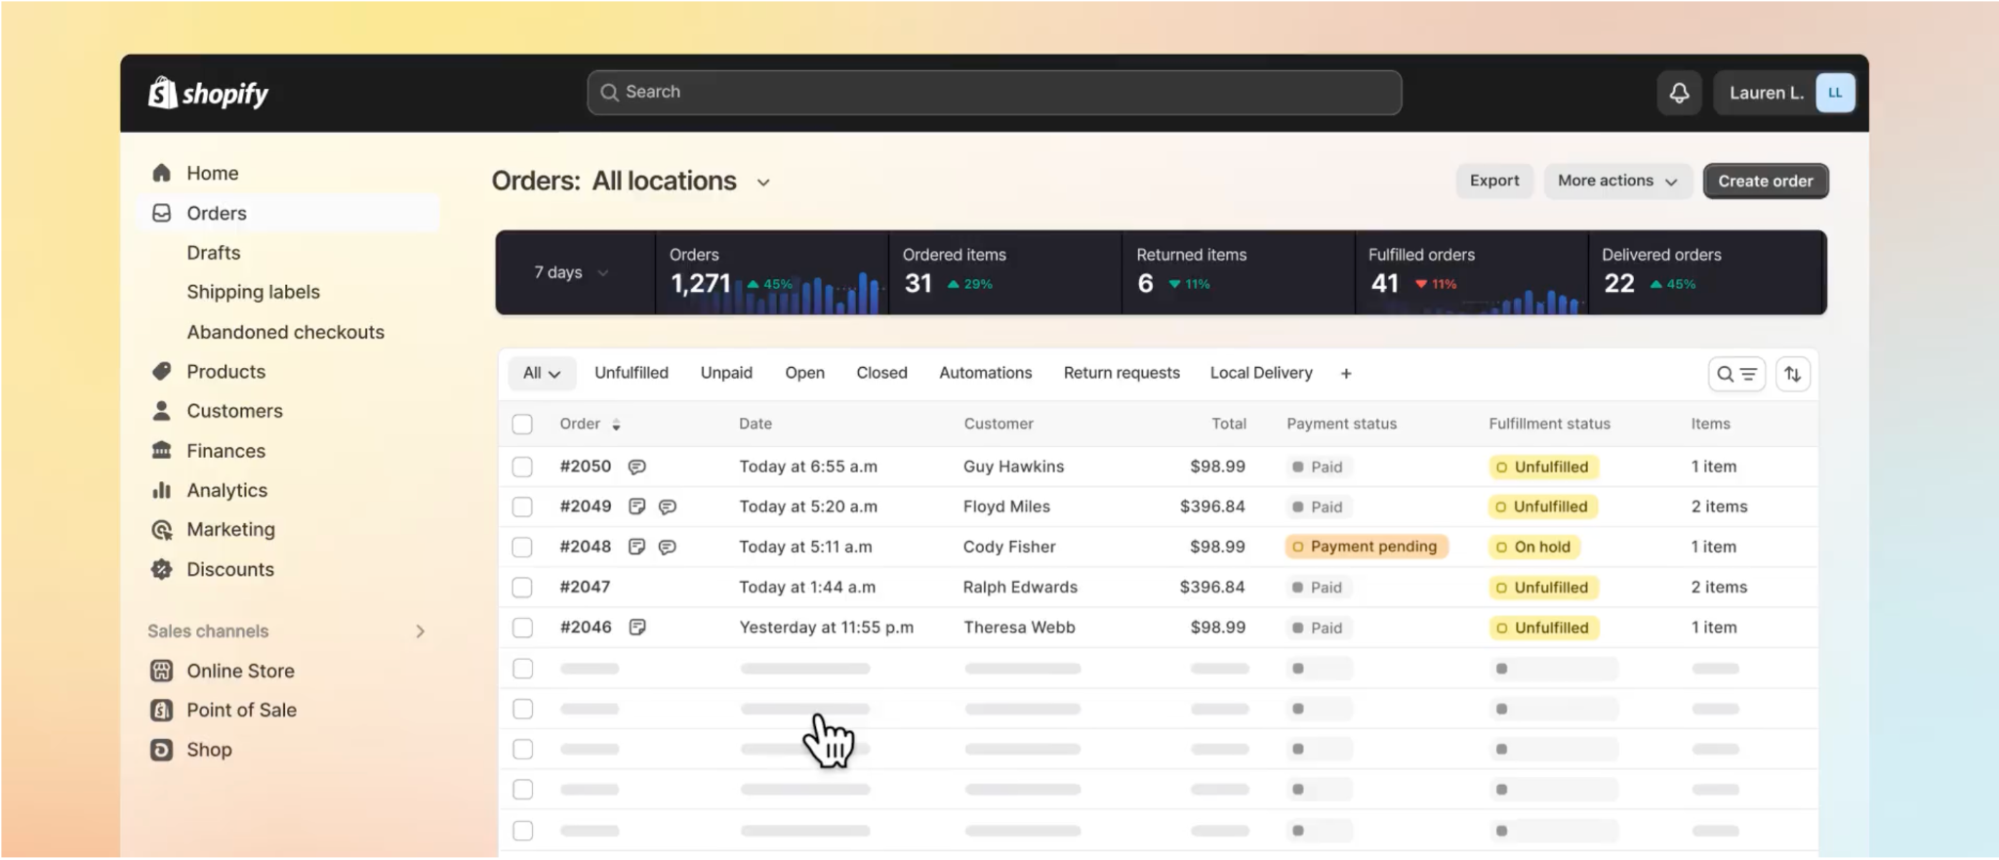 Shopify order management dashboard showing recently received orders and their statuses.